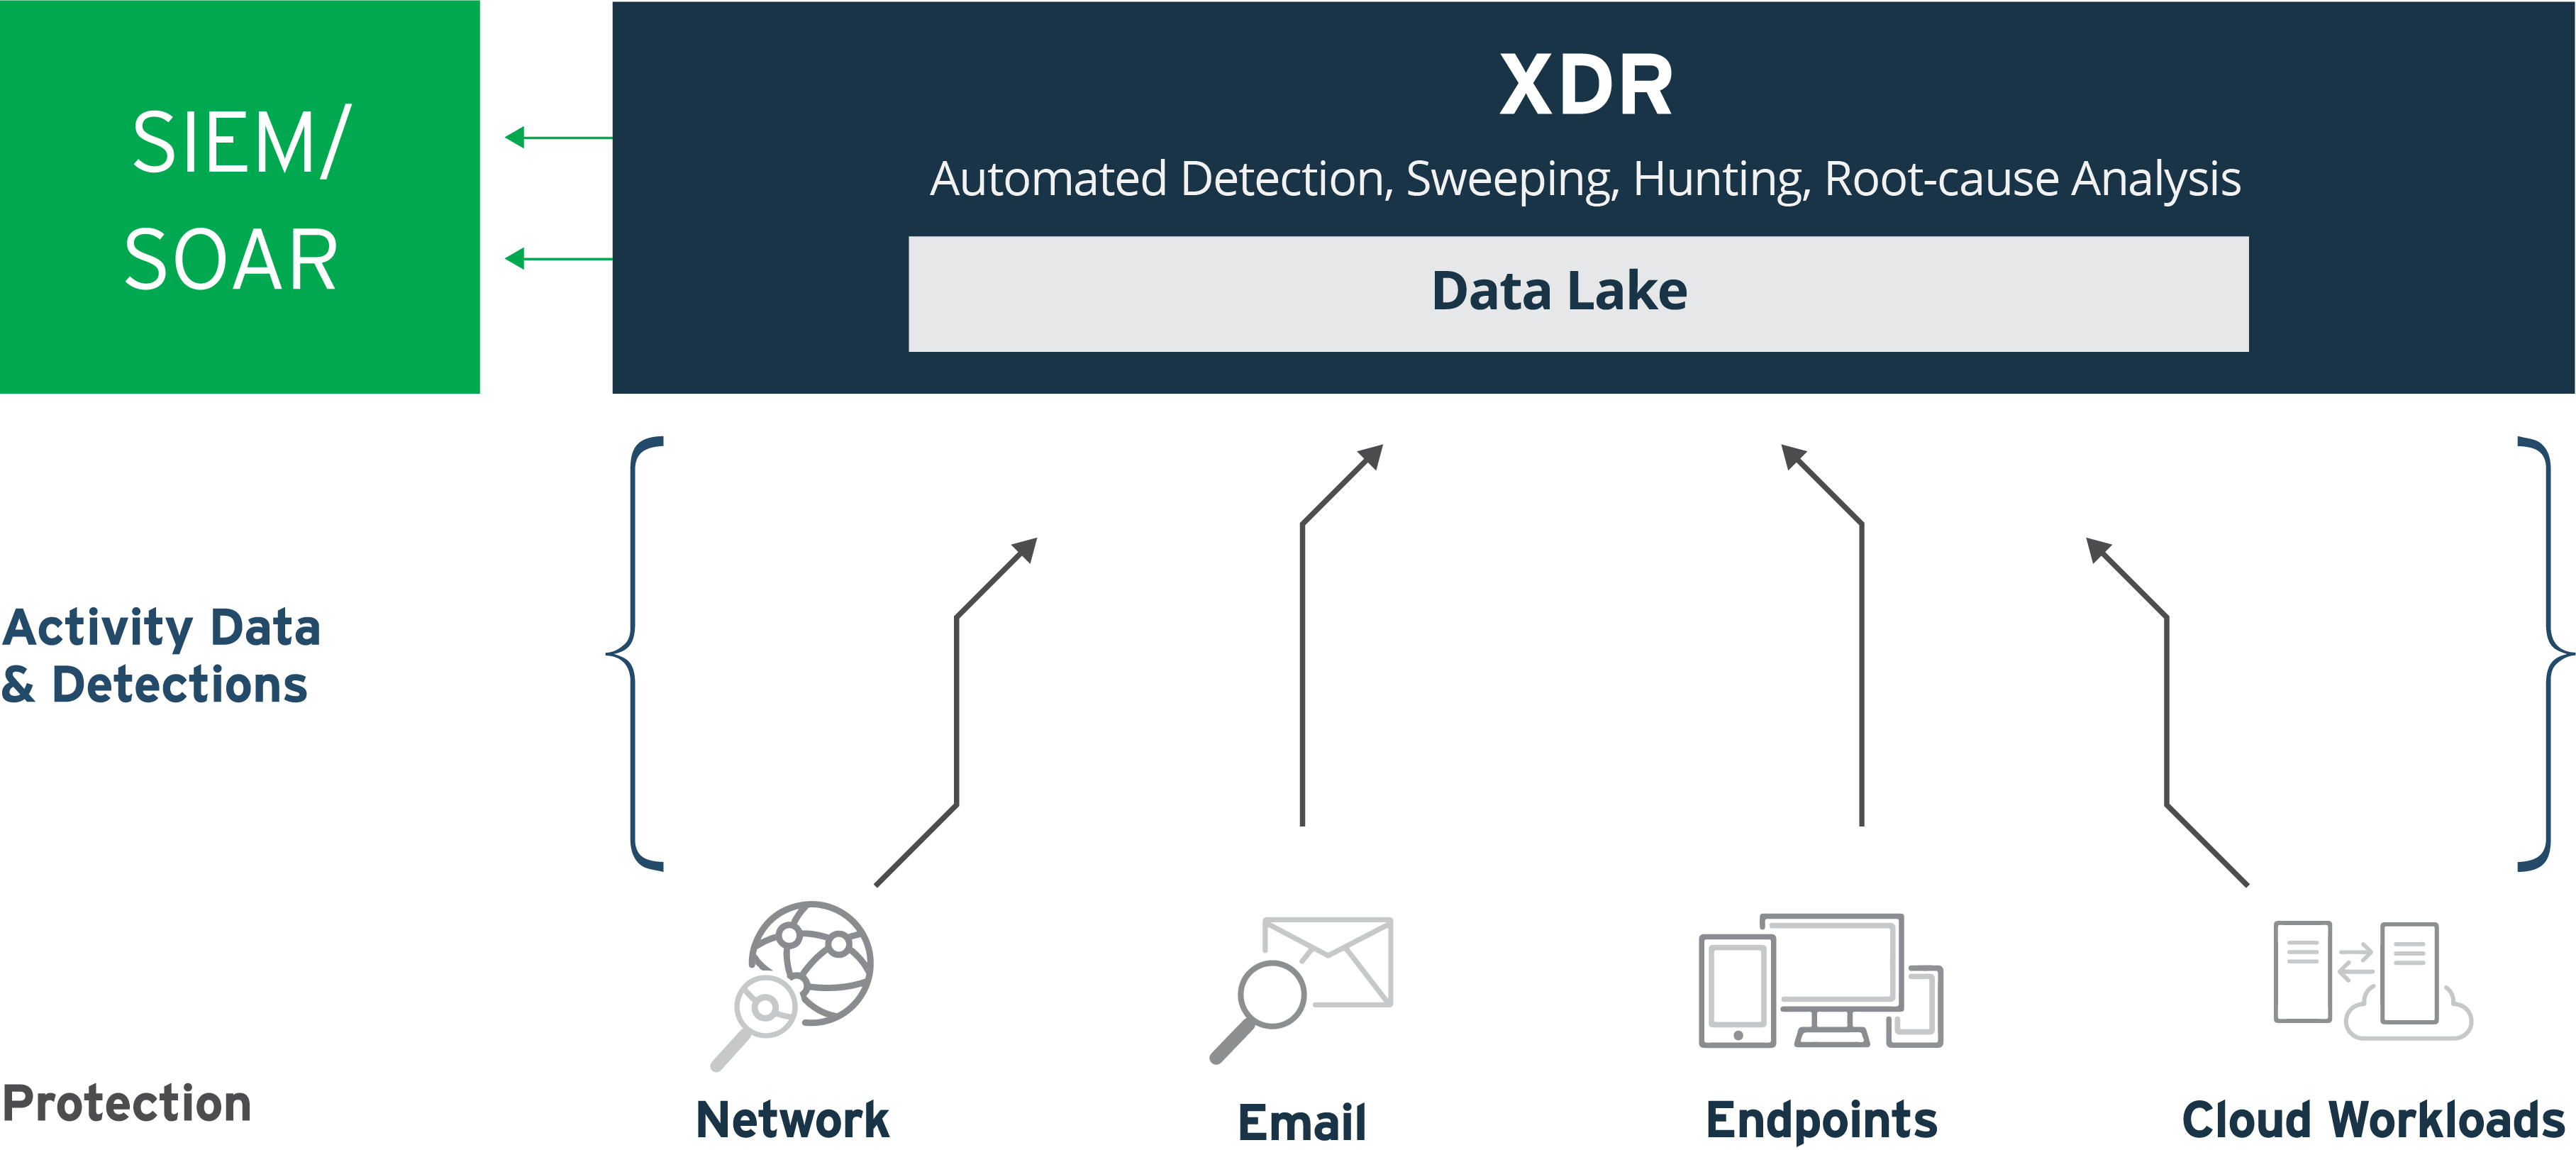 This is an image of different security layers that can feed into XDR